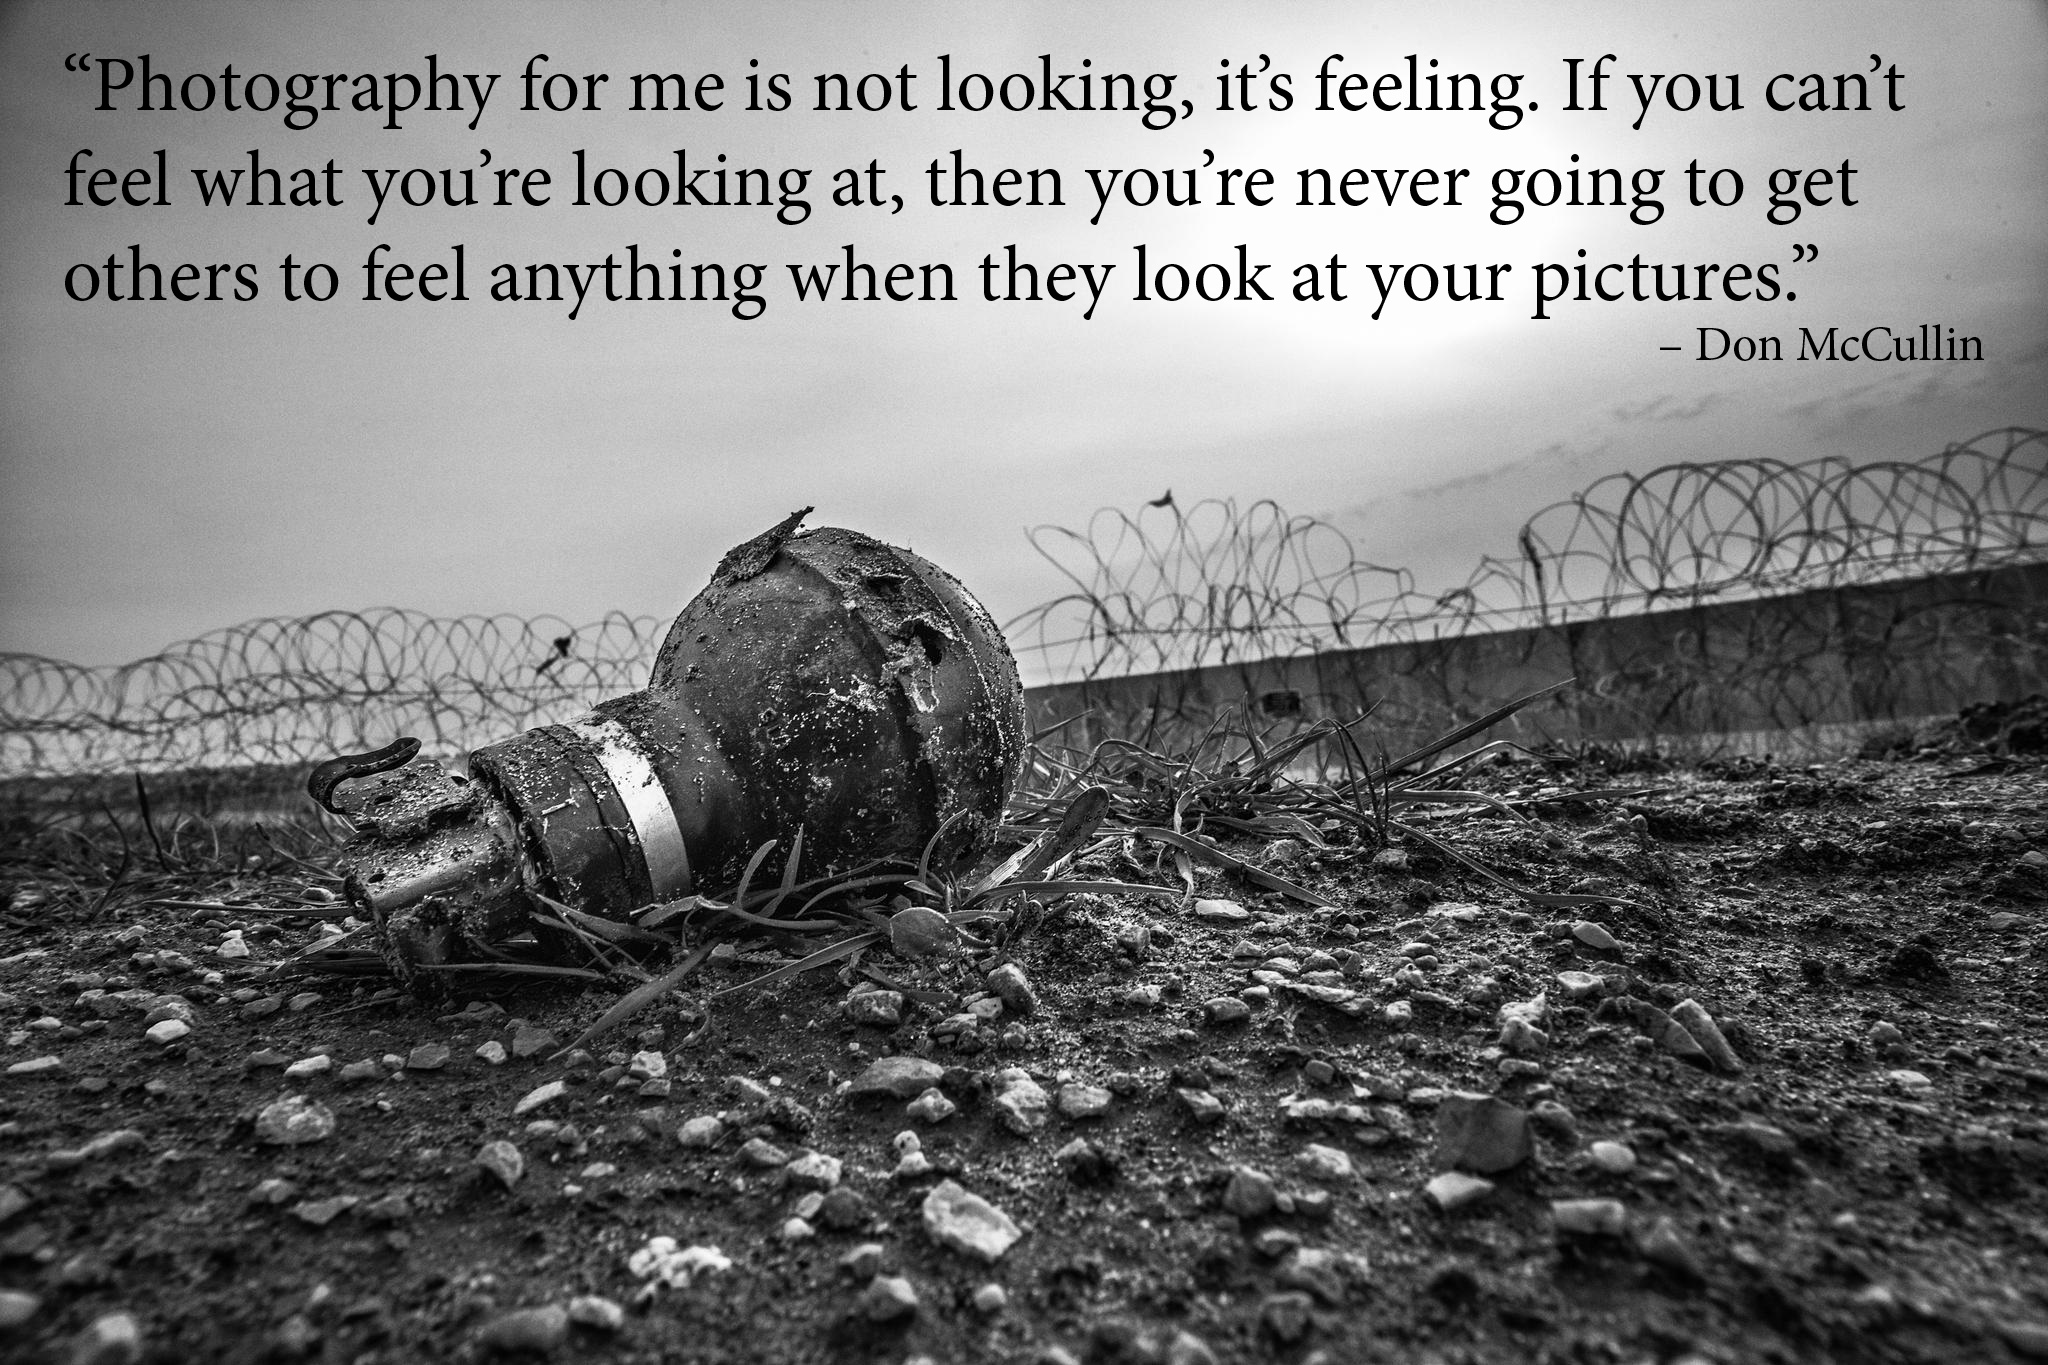 Photography for me is not looking, it’s feeling. If you can’t feel what you’re looking at, then you’re never going to get others to feel anything when they look at … Don McCullin